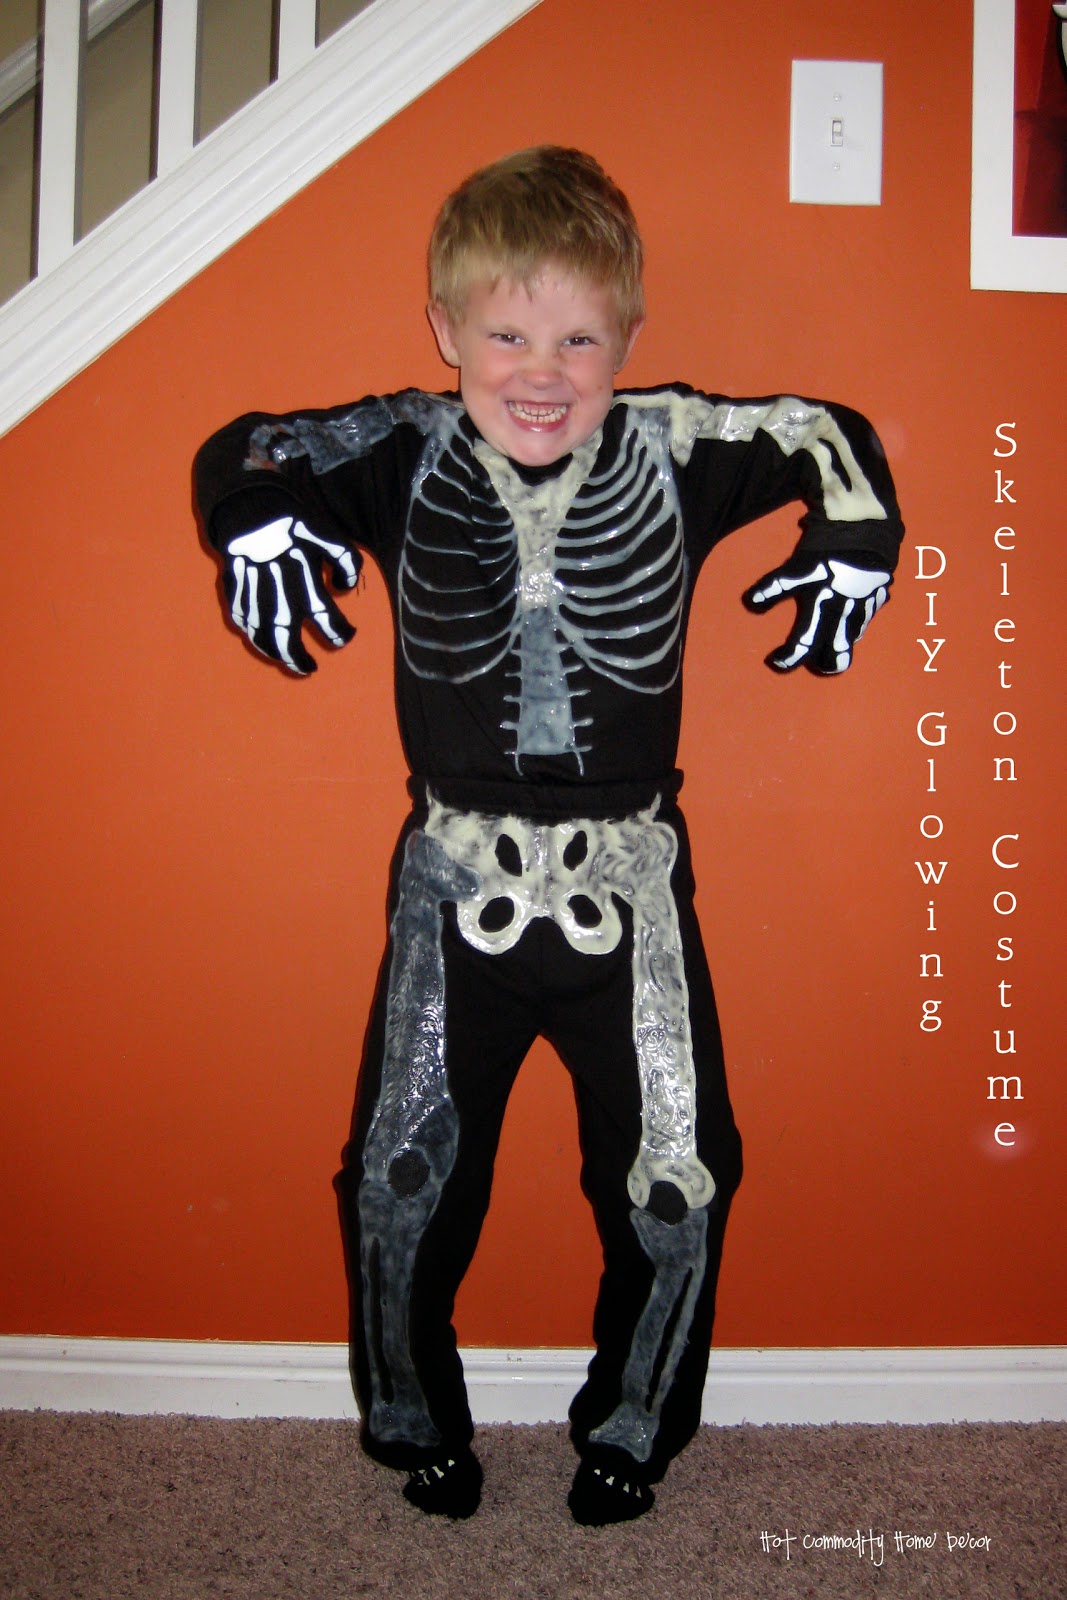 Hot Commodity Home Decor: DIY Halloween Costumes - Glowing Skeleton and ...